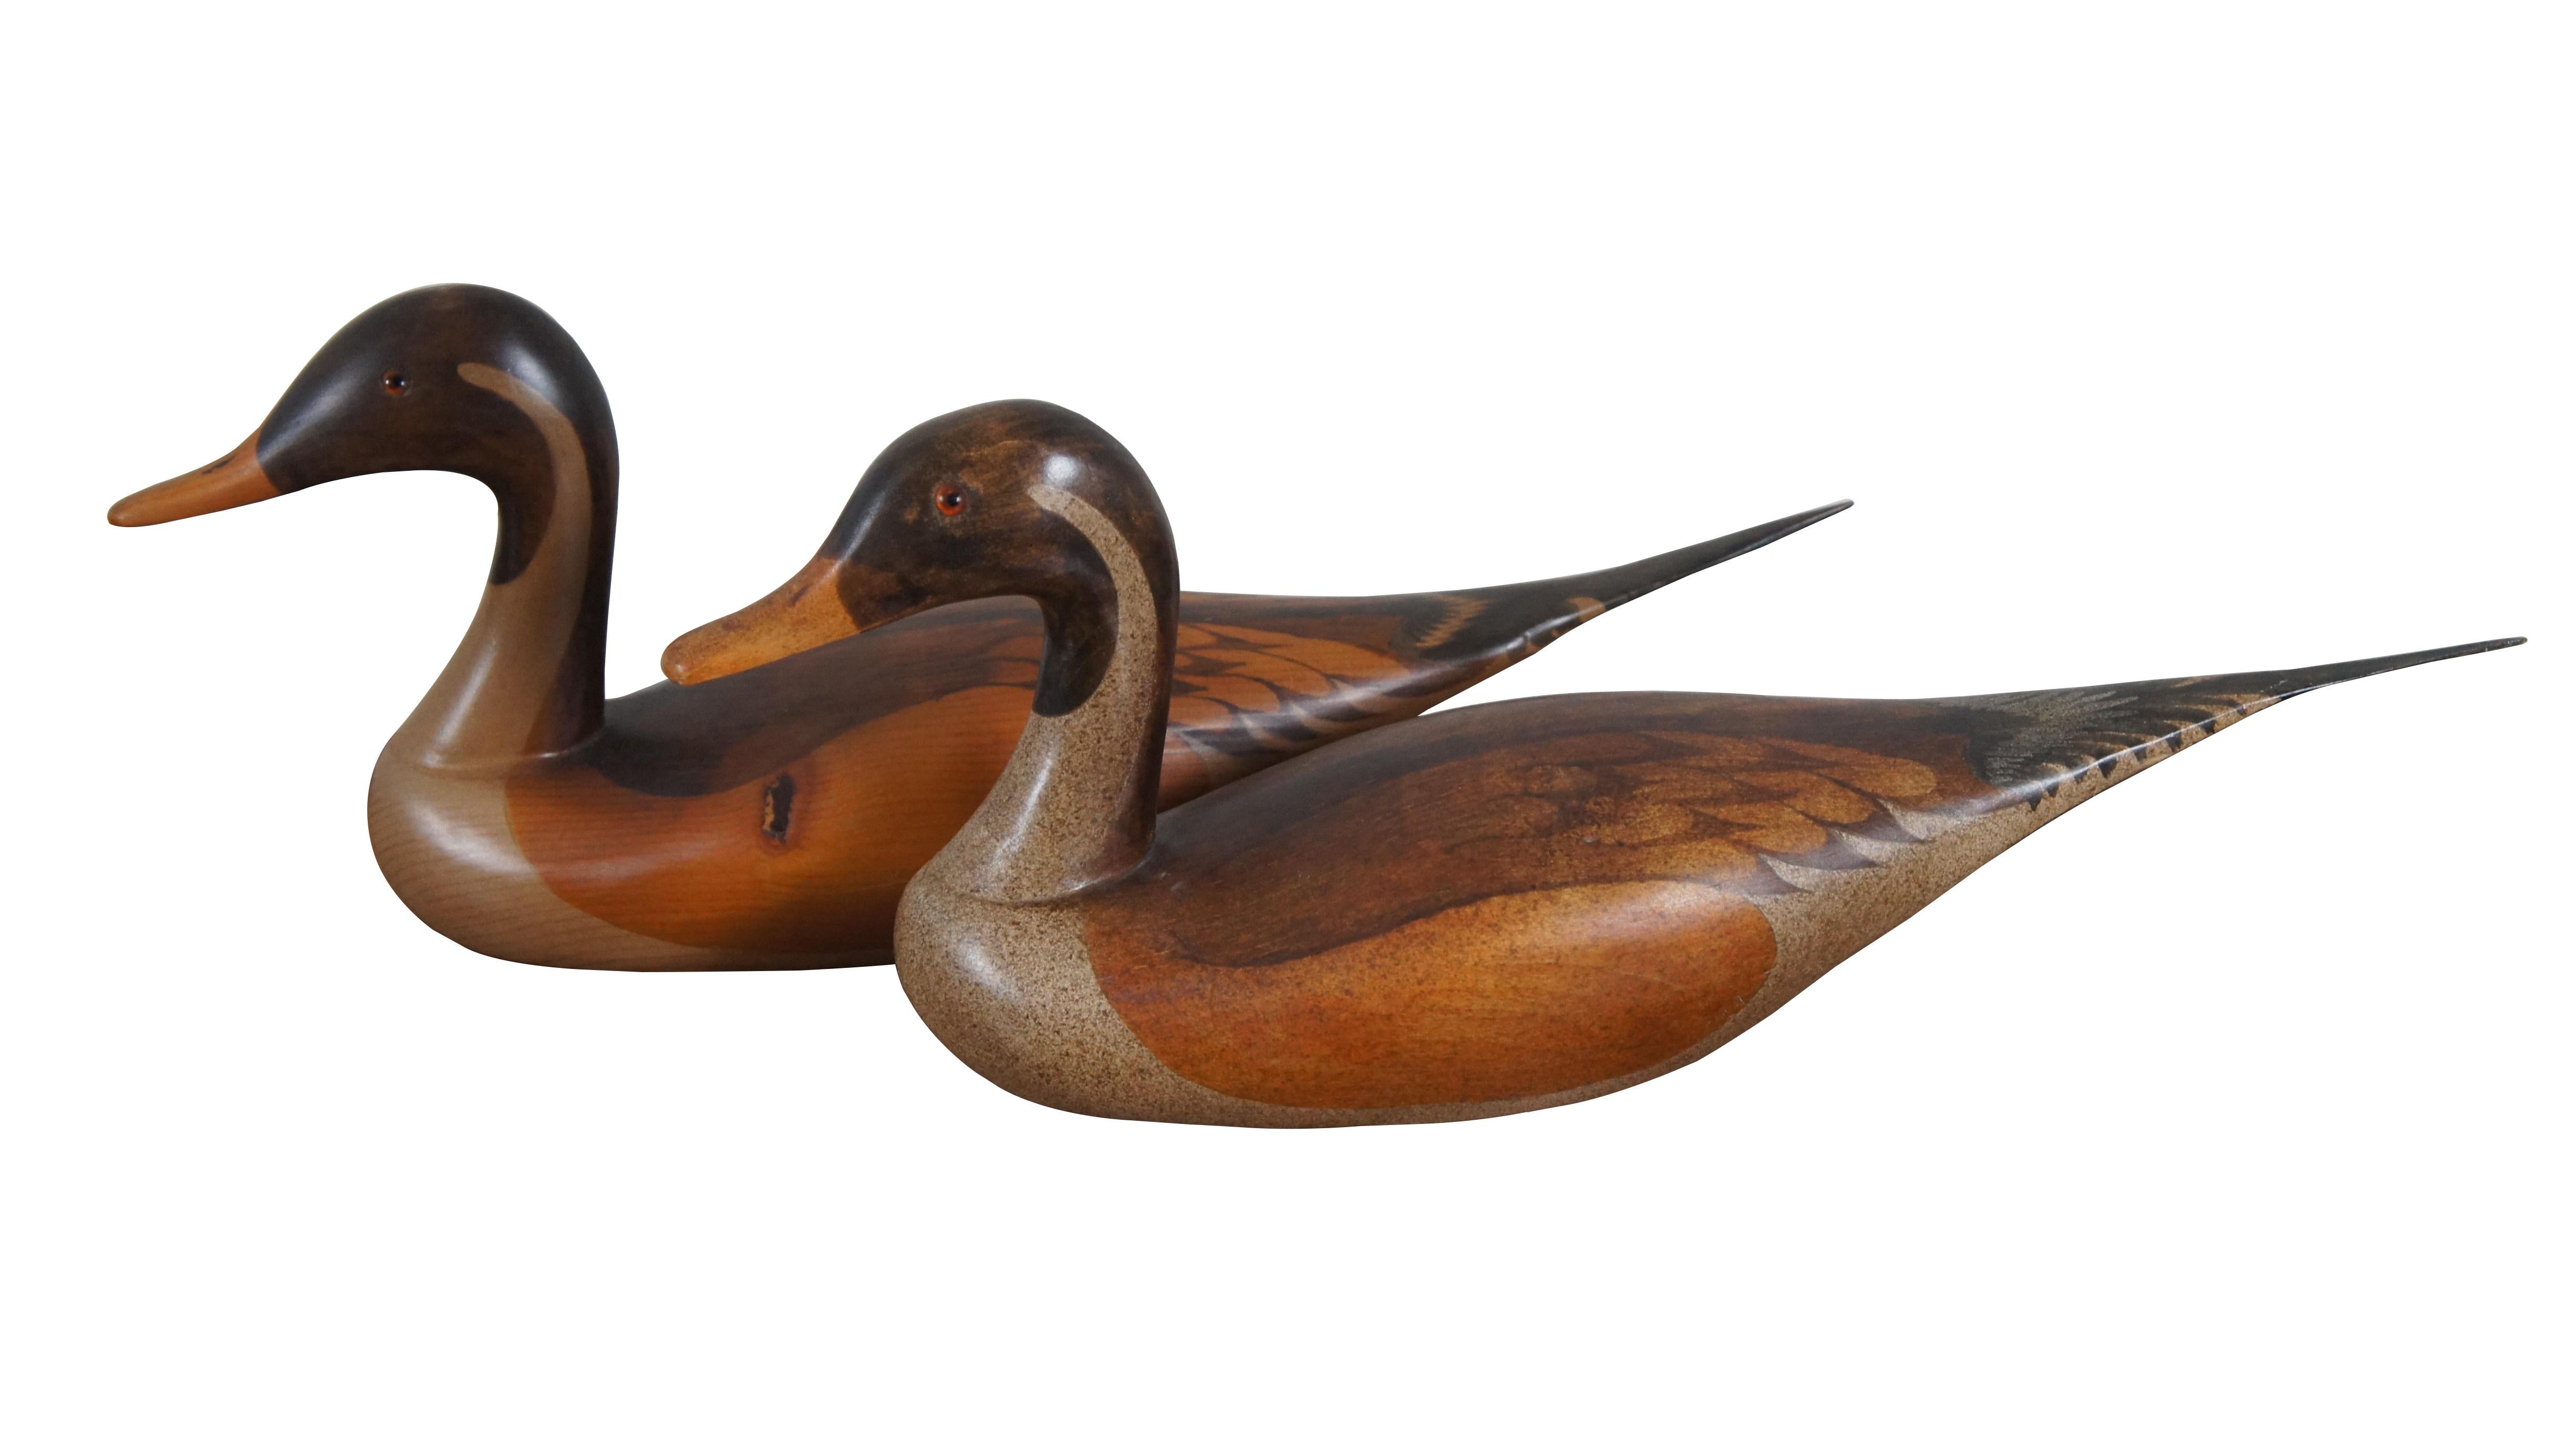 Three vintage 1980's hand carved wooden duck decoys with stained feather details and amber glass eyes. Two by Craig Fellows of Big Sky Carvers Bozeman Montana (dated 1/8/81 and 2/13/81) and one (Pine) by D.A. Callaway (dated